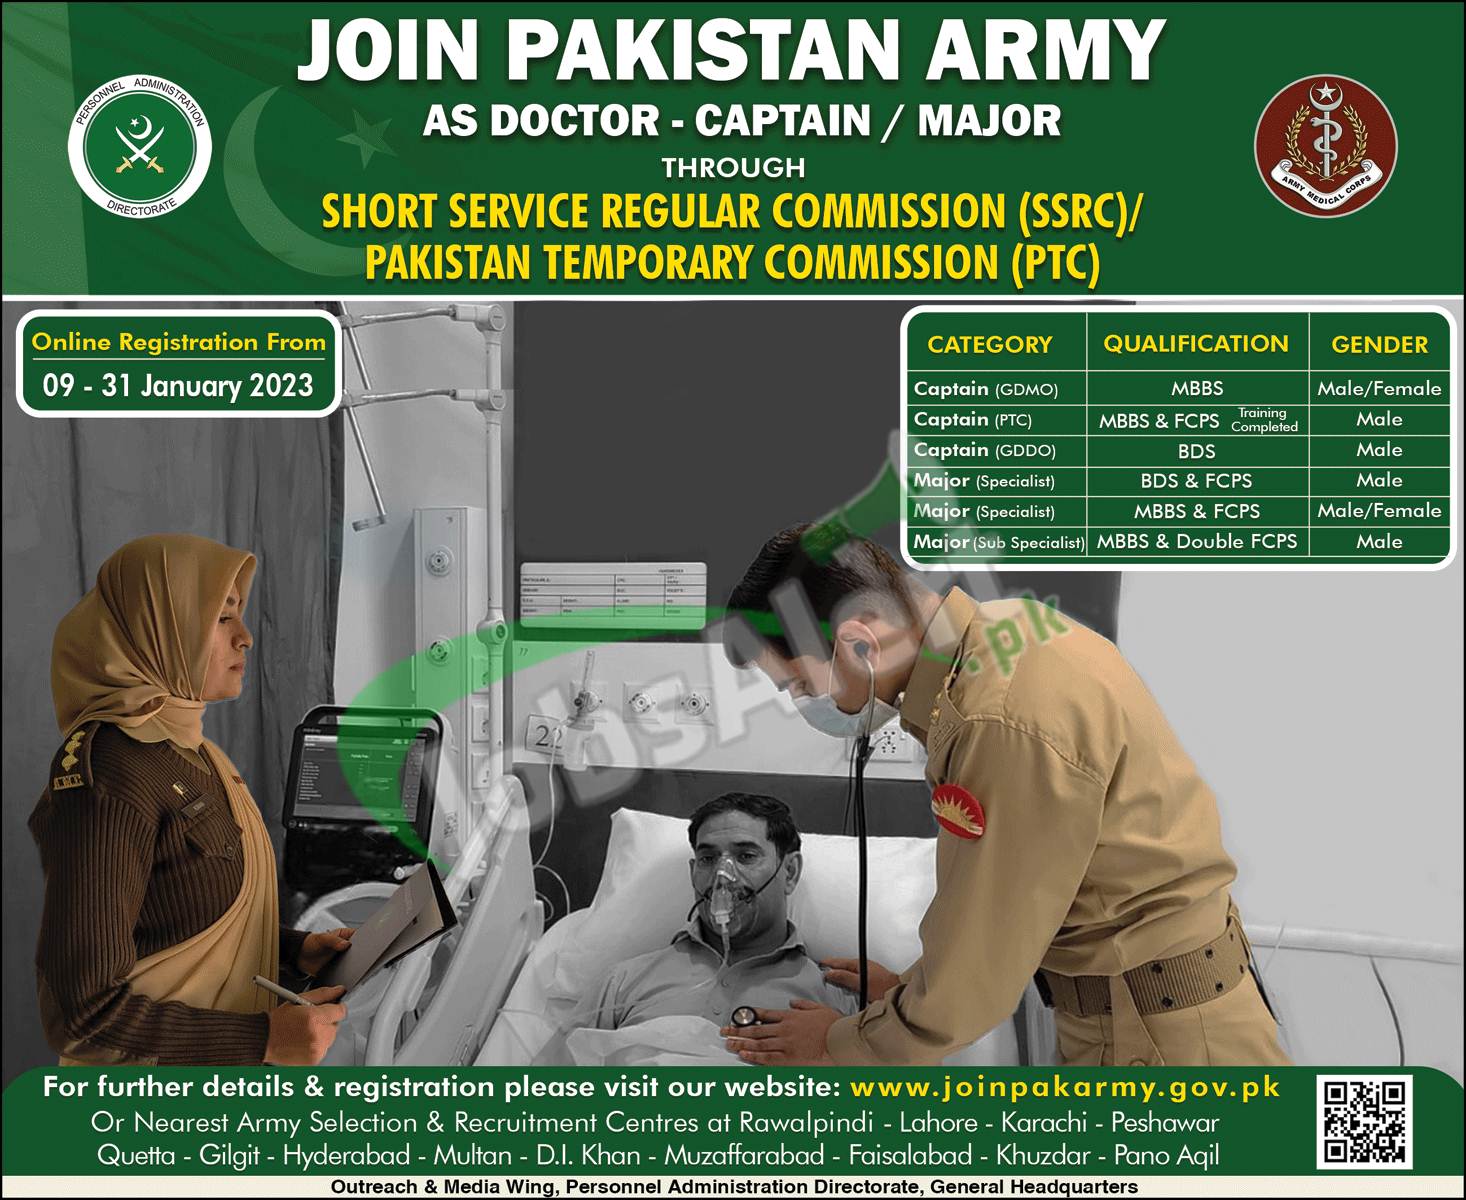 Join Pak Army as Captain Doctor 2023 Through Short Service Regular Commission